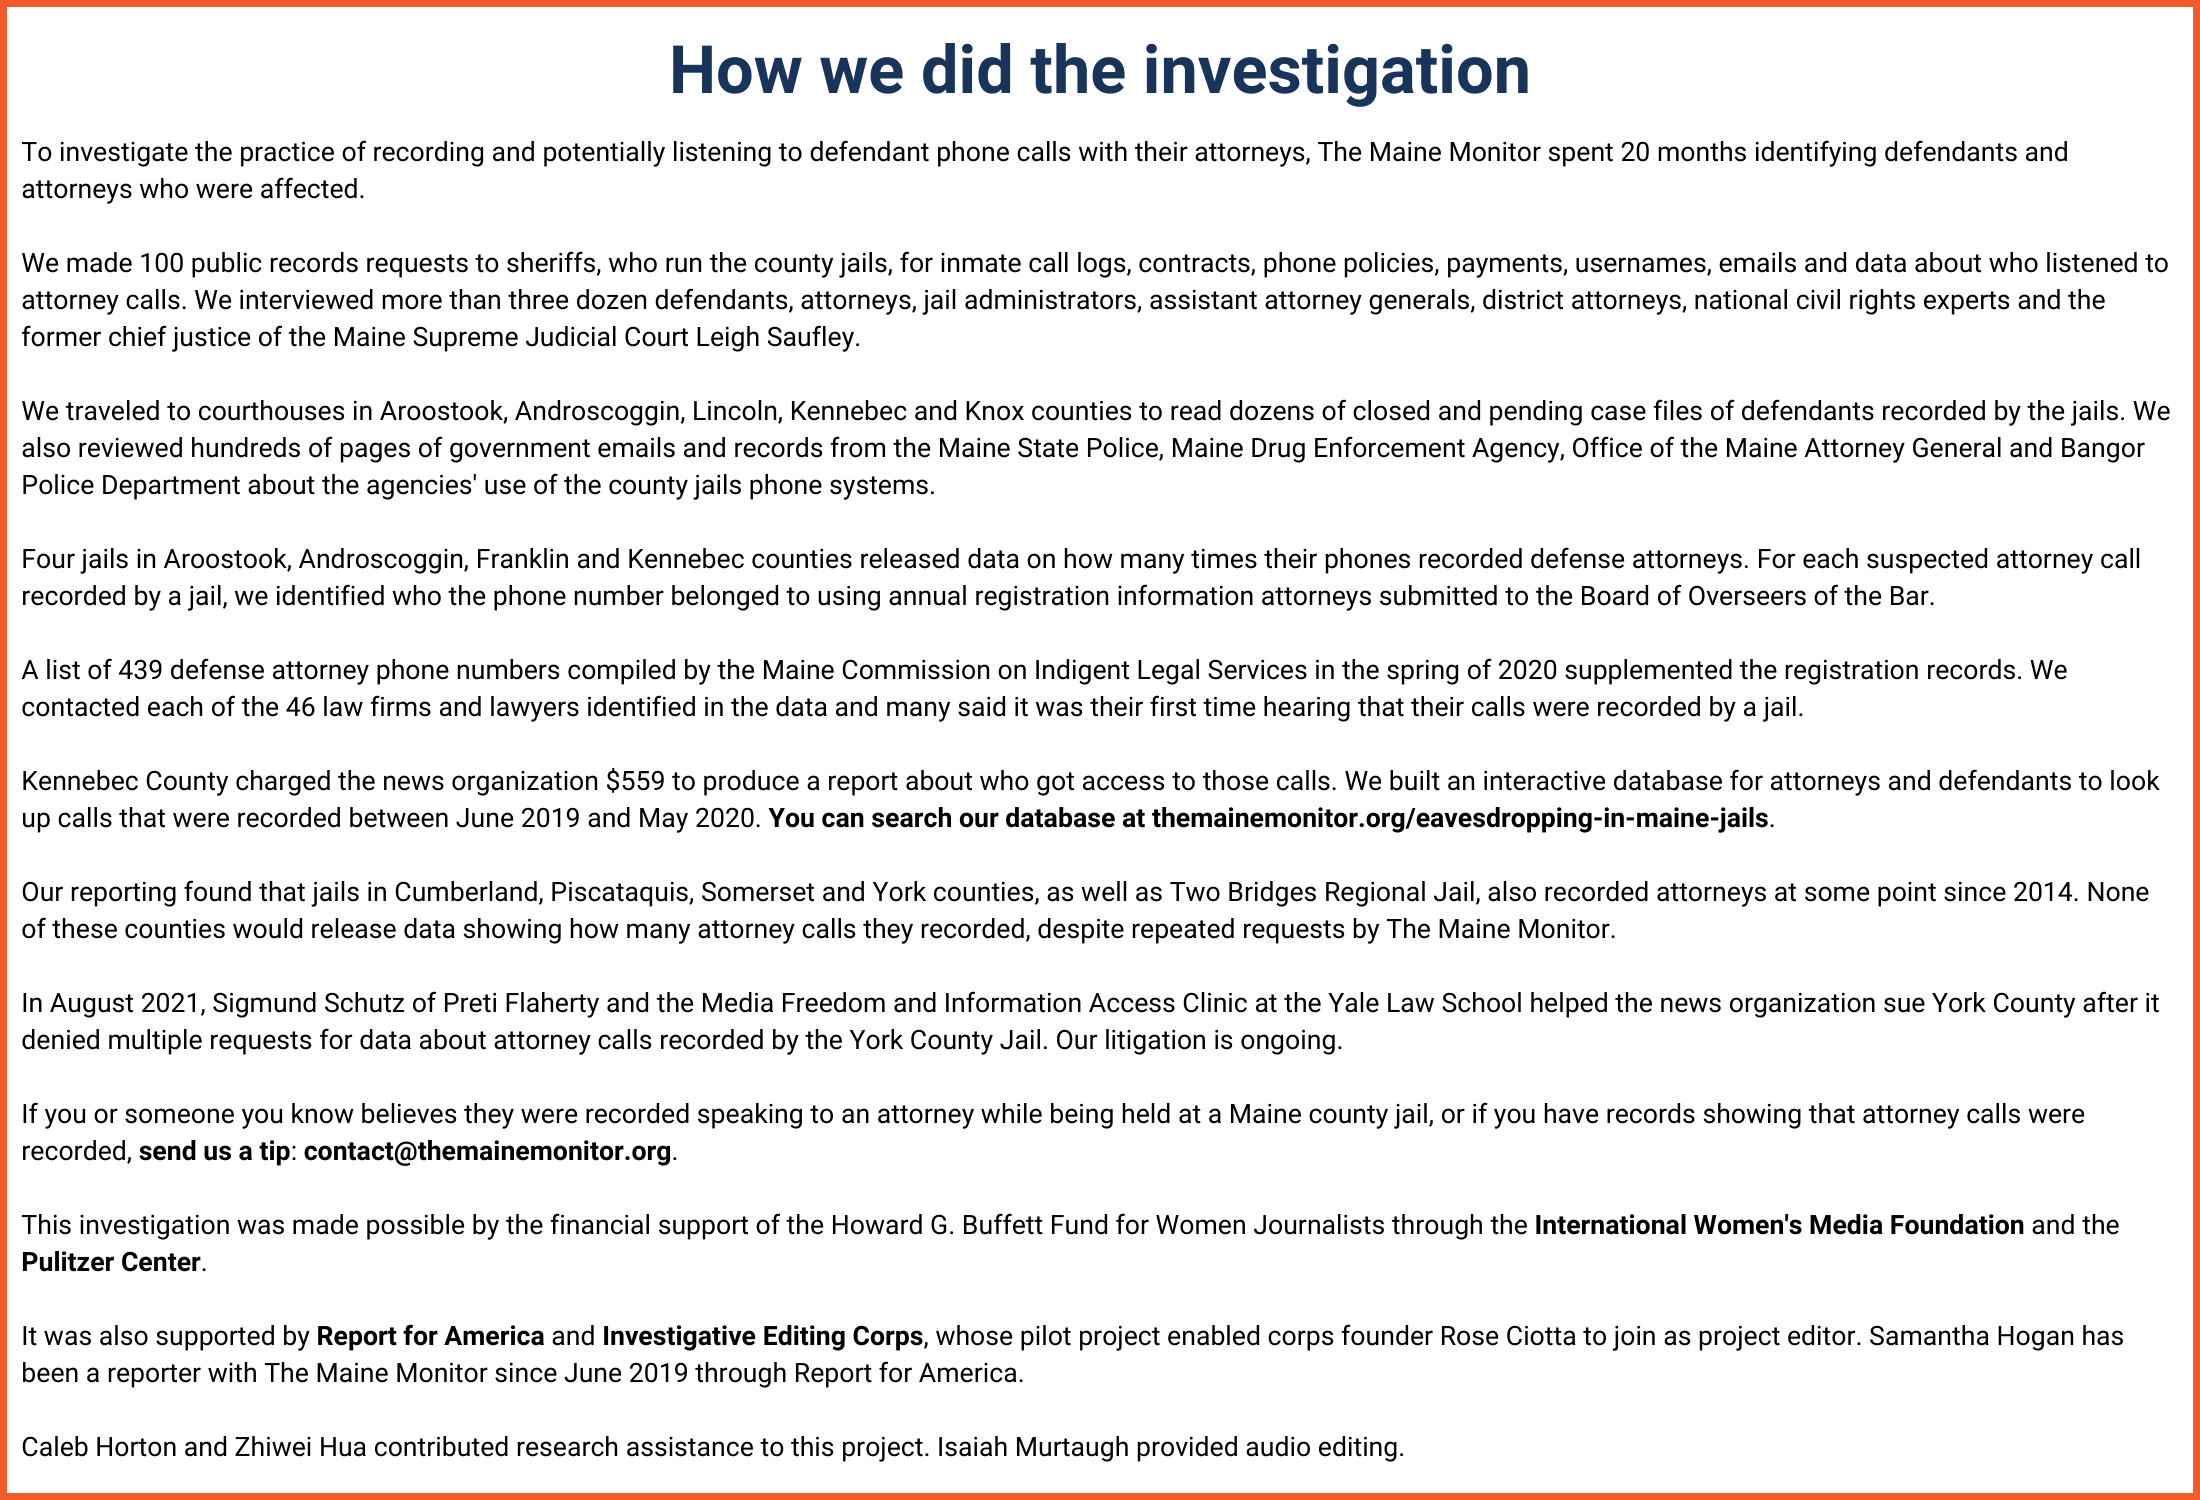 How we did the investigation. To investigate the practice of recording and listening to defendant phone calls with their attorneys, The Maine Monitor spent 20 months identifying defendants and attorneys who were affected. We made 100 public records requests to sheriffs, who run the county jails, for inmate call logs, contracts, phone policies, payments, usernames, emails and data about who listened to attorney calls. We interviewed more than three dozen defendants, attorneys, jail administrators, assistant attorney generals, district attorneys, national civil rights experts and the former chief justice of the Maine Supreme Judicial Court Leigh Saufley. We traveled to courthouses in Aroostook, Androscoggin, Lincoln, Kennebec, Knox and York counties to read dozens of closed and pending case files of defendants recorded by the jails. We also reviewed hundreds of pages of government emails and records from the Maine State Police, Maine Drug Enforcement Agency, Office of the Maine Attorney General and Bangor Police Department about the agencies' use of the county jails phone systems. Four jails in Aroostook, Androscoggin, Franklin and Kennebec counties released data on how many times their phones recorded defense attorneys. For each suspected attorney call recorded by a jail, we identified who the phone number belonged to using annual registration information attorneys submitted to the Board of Overseers of the Bar. A list of 439 defense attorney phone numbers compiled by the Maine Commission on Indigent Legal Services in the spring of 2020 supplemented the registration records. We contacted each of the 46 law firms and lawyers identified in the data and many said it was their first time hearing that their calls were recorded by a jail. We've continued to do this as we've received more data from York and Penobscot counties. Kennebec County charged the news organization $559 to produce a report about who got access to those calls. We built an interactive database for attorneys and defendants to look up calls that were recorded between June 2019 and May 2020. You can search our database here. Our reporting found that jails in Cumberland, Piscataquis and Somerset counties, as well as Two Bridges Regional Jail, also recorded attorneys at some point since 2014. None of these counties would release data showing how many attorney calls they recorded, despite repeated requests by The Maine Monitor. In August 2021, Sigmund Schutz of Preti Flaherty and the Media Freedom and Information Access Clinic at the Yale Law School helped the news organization sue York County after it denied multiple requests for data about attorney calls recorded by the York County Jail. Our litigation is ongoing. If you or someone you know believes they were recorded speaking to an attorney while being held at a Maine county jail, or if you have records showing that attorney calls were recorded, send us a tip here. This investigation was made possible by the financial support of the Howard G. Buffett Fund for Women Journalists through the International Women's Media Foundation and the Pulitzer Center. It was also supported by Report for America and Investigative Editing Corps, whose pilot project enabled corps founder Rose Ciotta to join as project editor. Samantha Hogan has been a reporter with The Maine Monitor since June 2019 through Report for America. Caleb Horton and Zhiwei Hua contributed research assistance to this project. Isaiah Murtaugh provided audio editing.